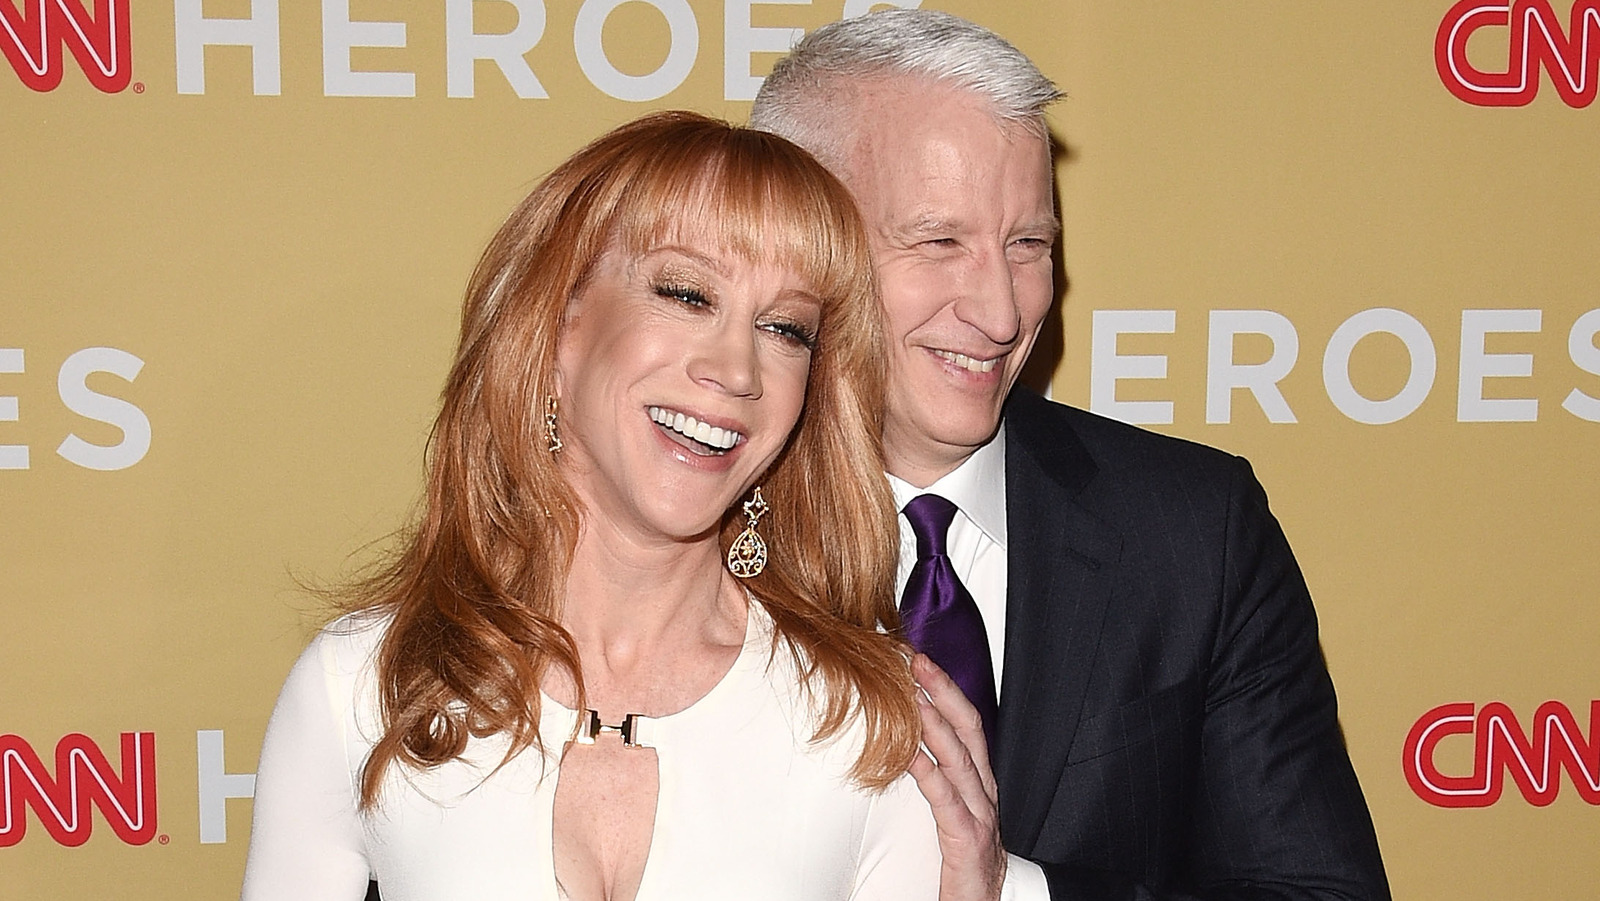 Why Anderson Cooper Ended His Friendship With Kathy Griffin Over Donald Trump